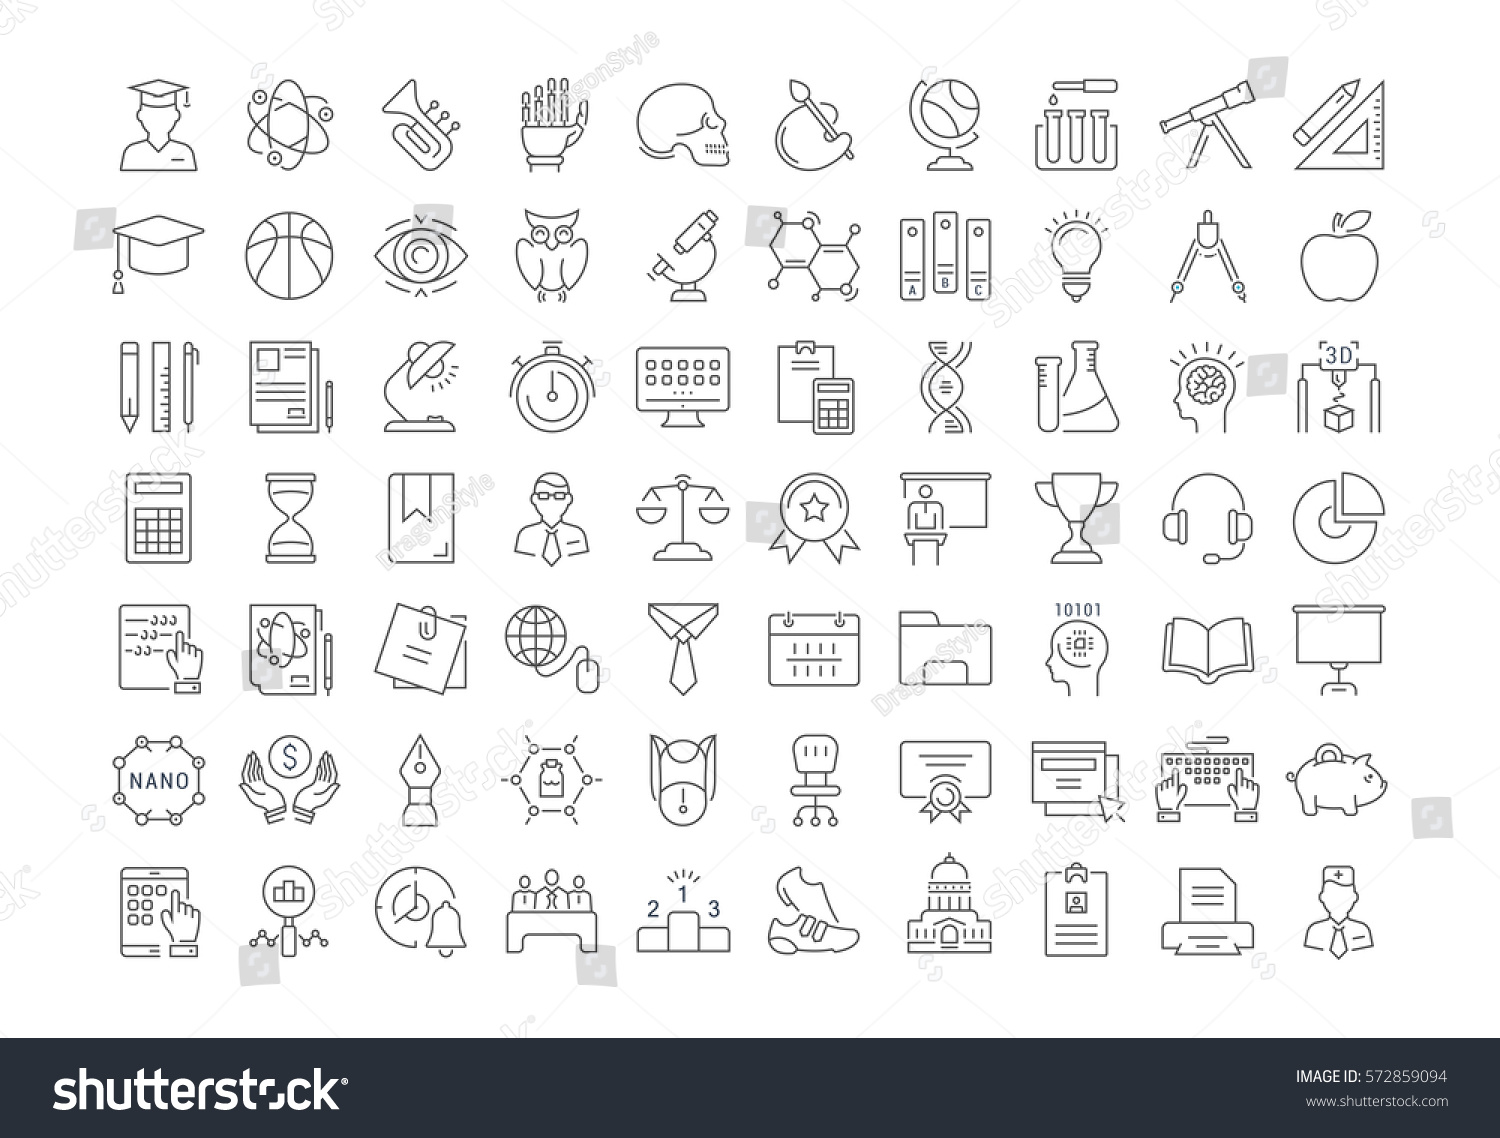 Set vector line icons, sign and symbols in flat design university, e-learning and science with elements for mobile concepts and web apps. Collection modern infographic logo and pictogram. #572859094